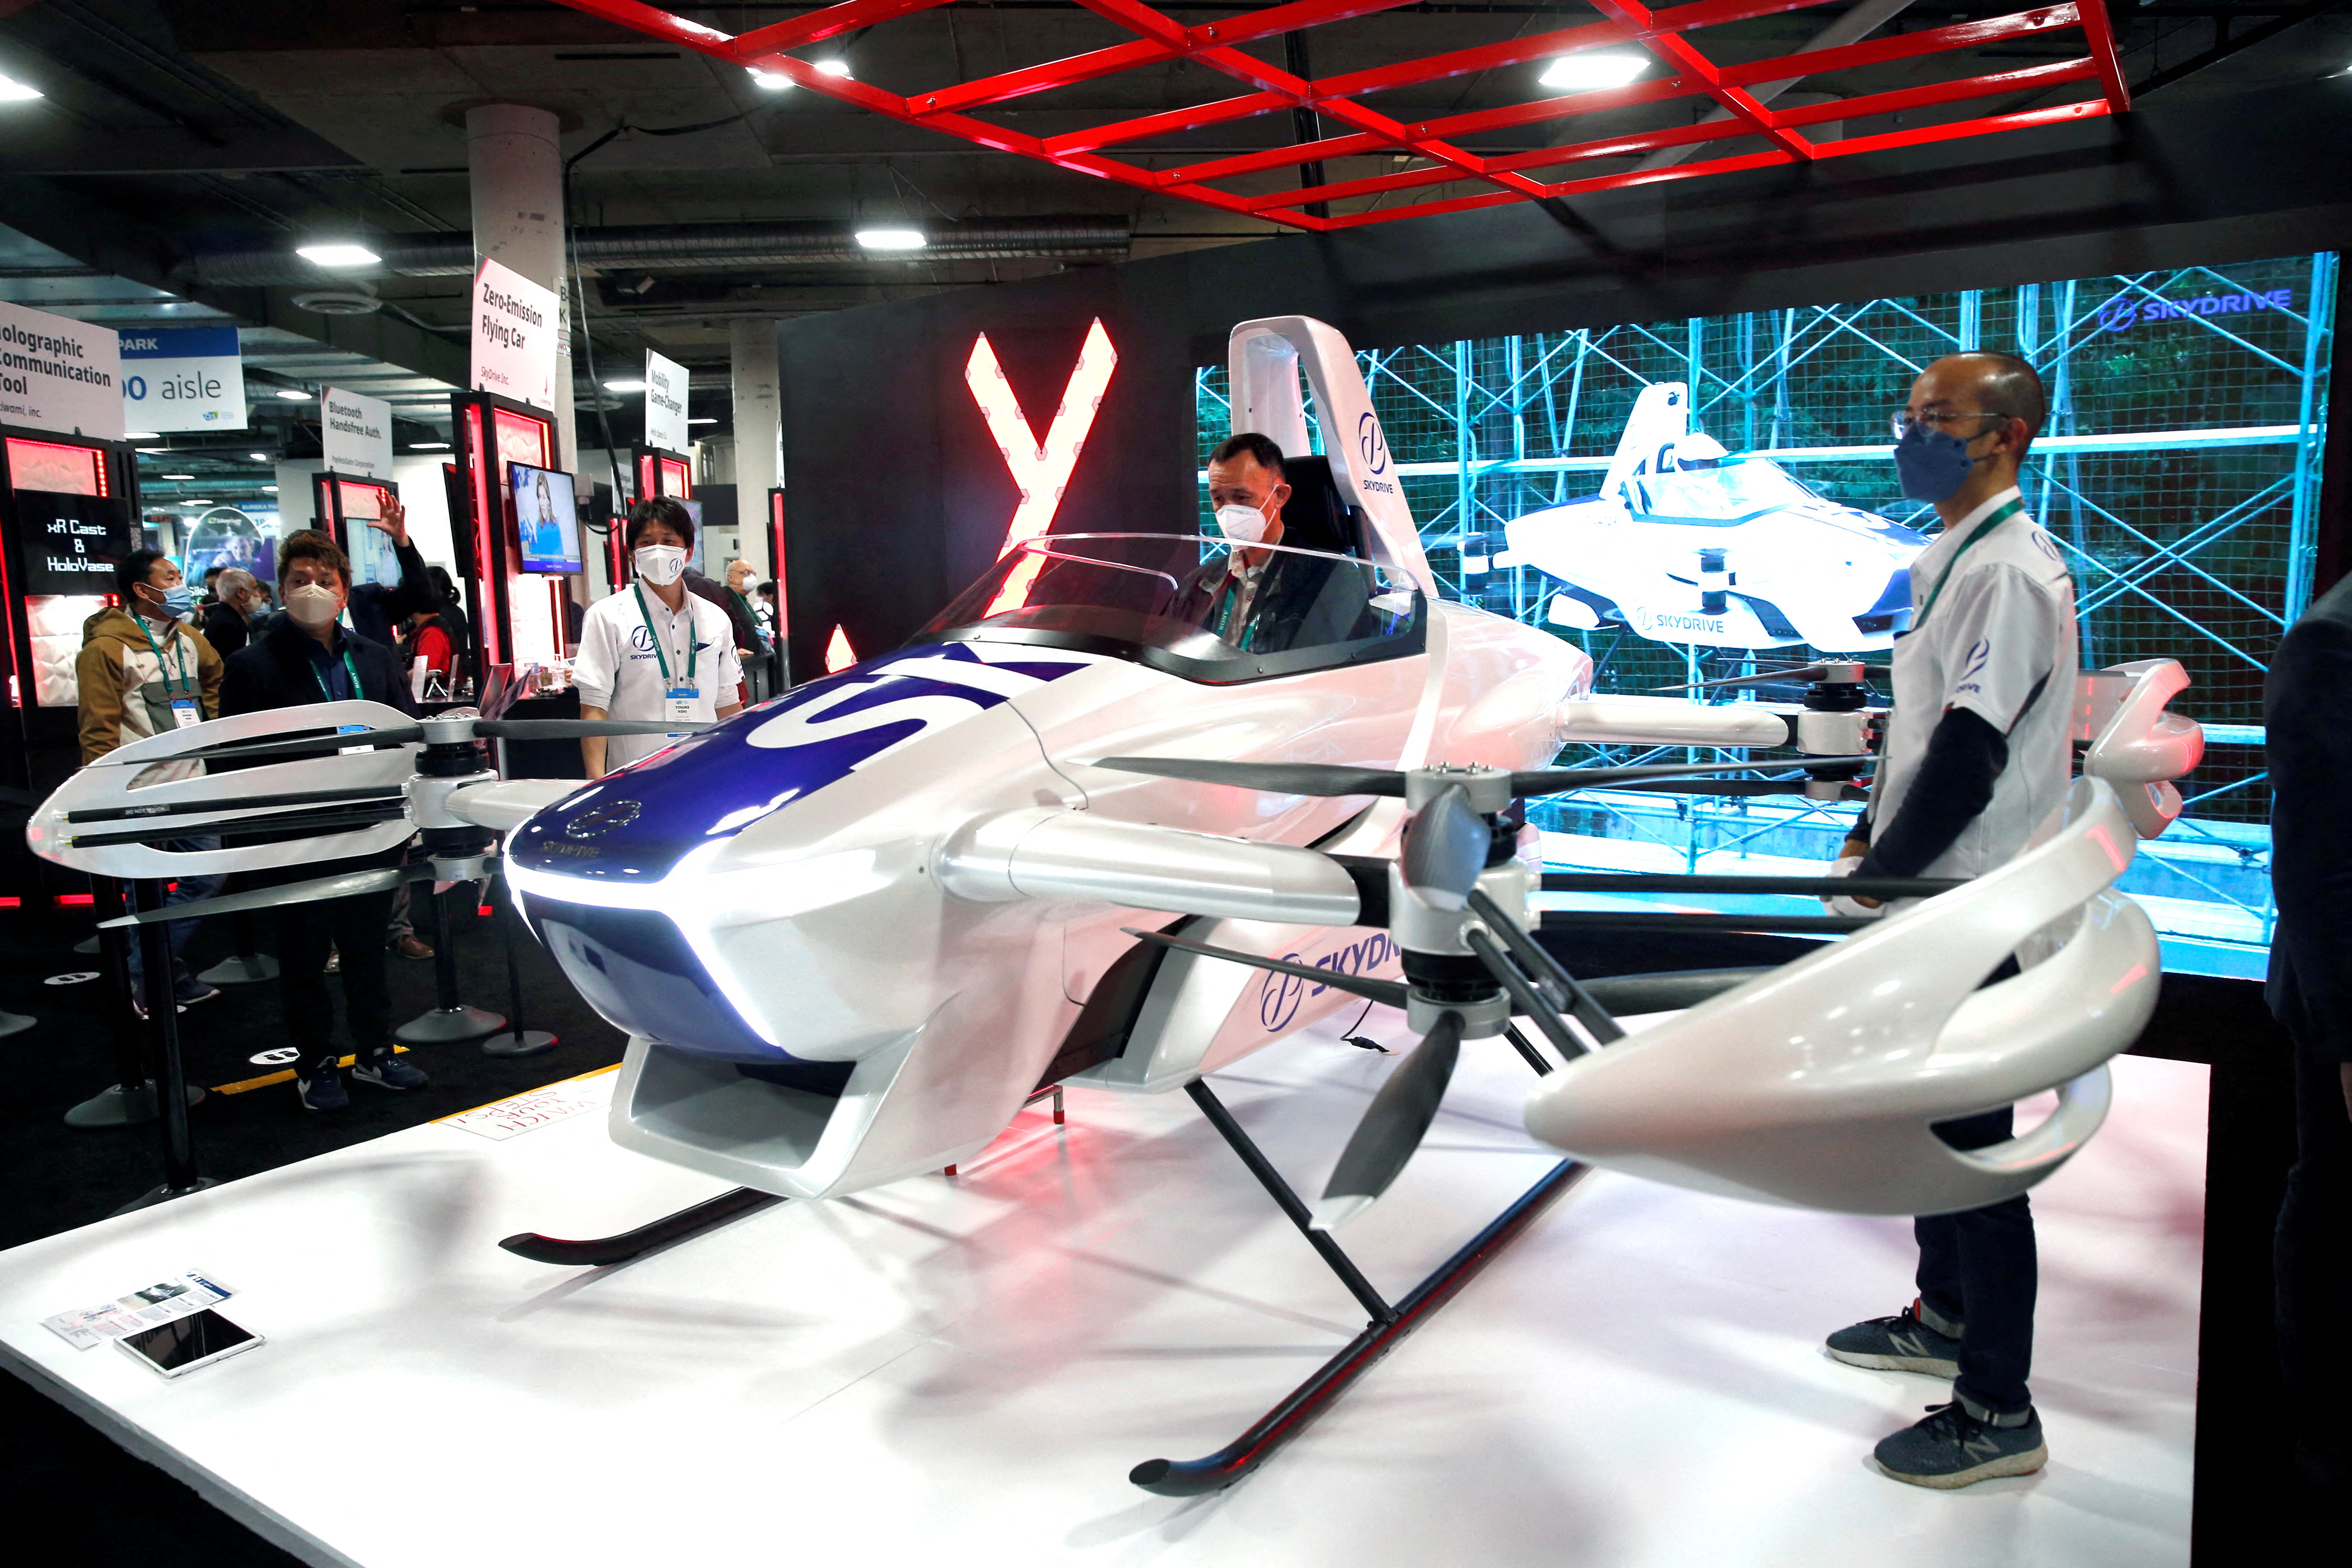 A SkyDrive flying car is pictured at CES 2022 in Las Vegas